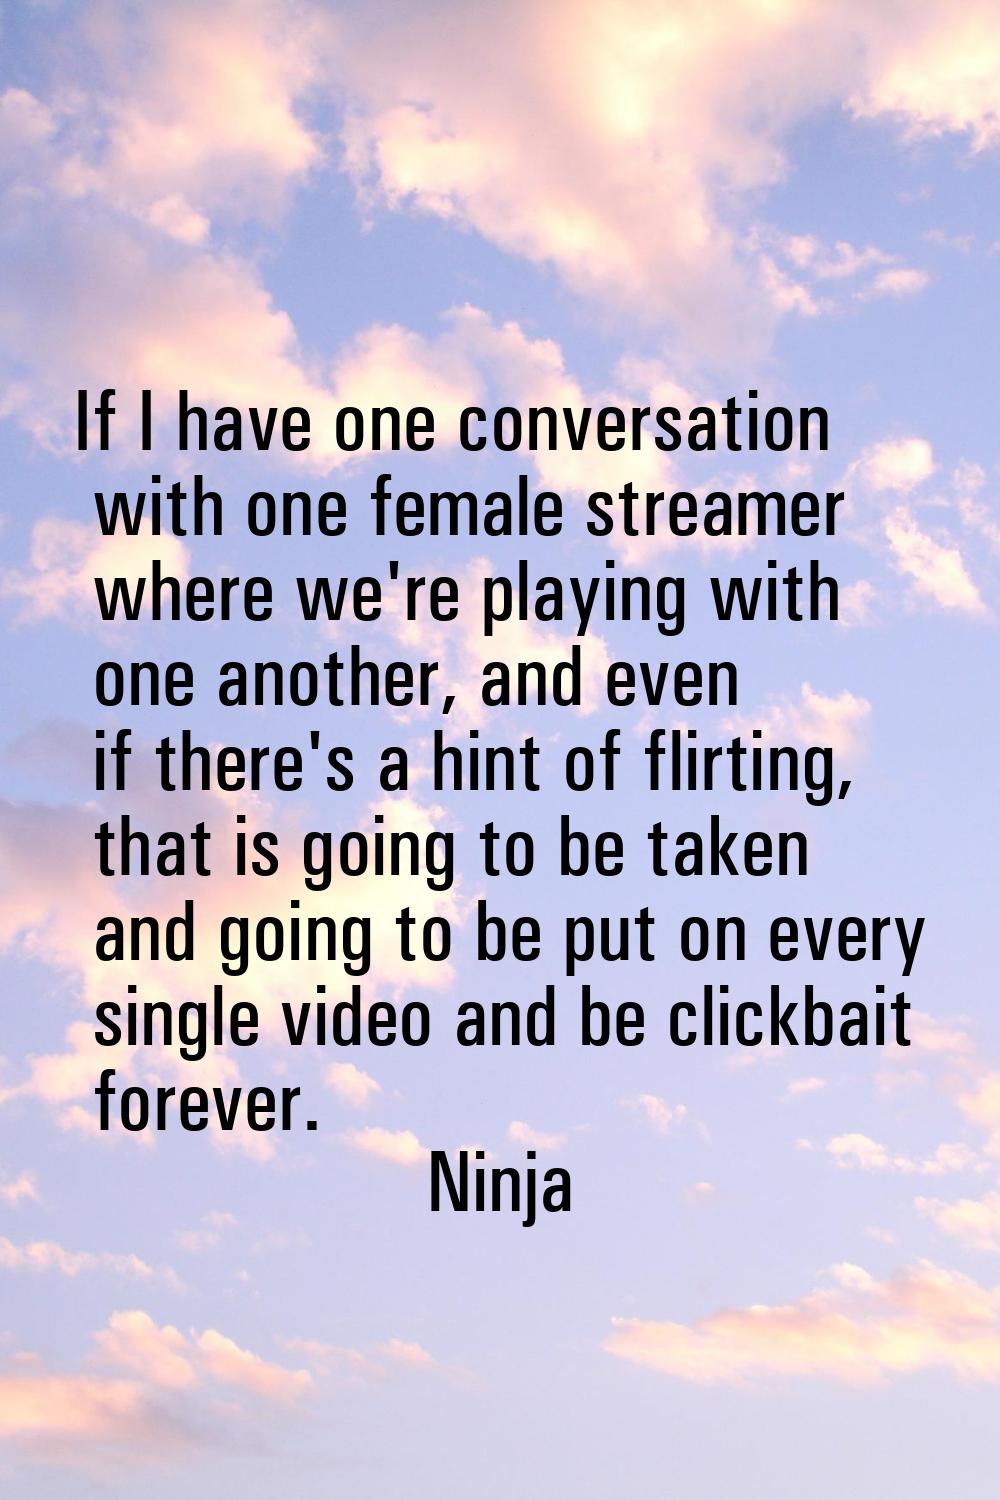 If I have one conversation with one female streamer where we're playing with one another, and even 